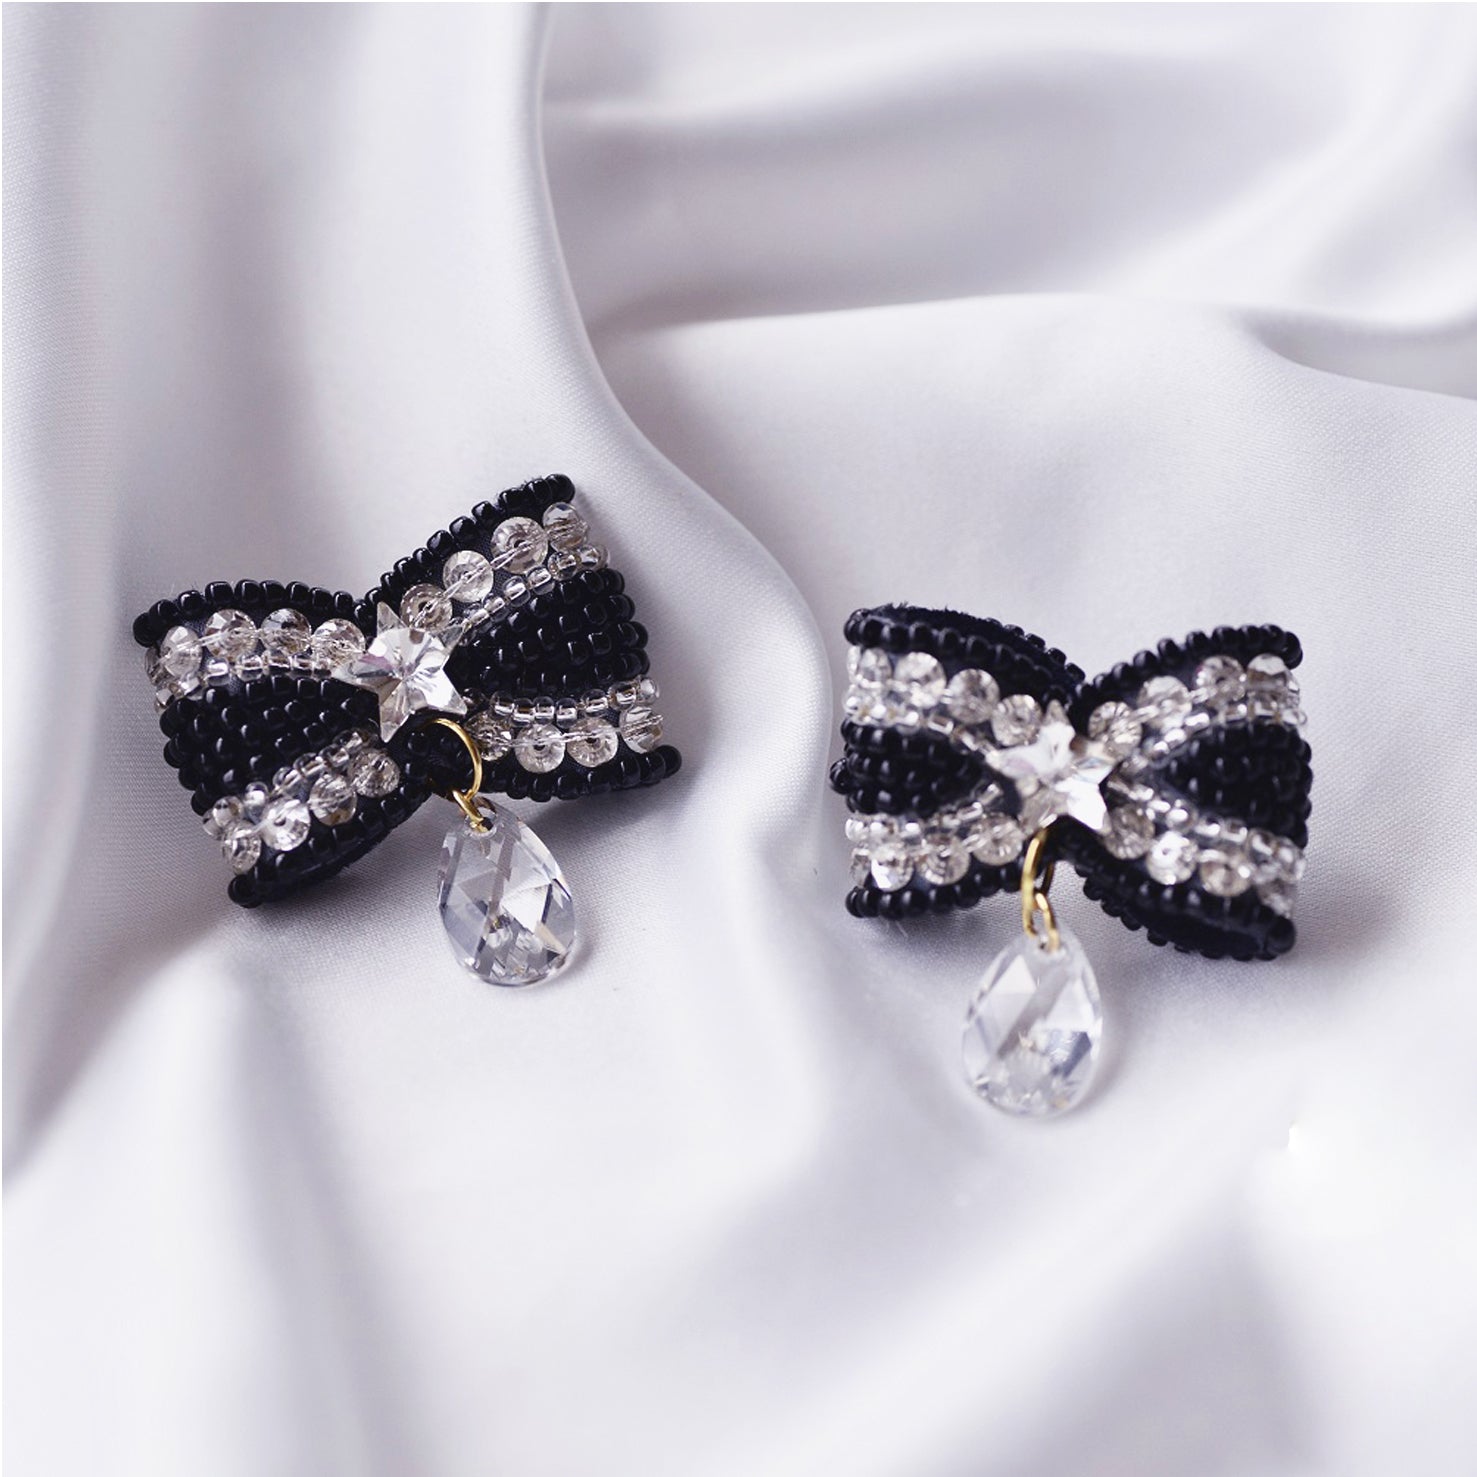 Tambour Embroidery Craft Kits-Black Bow Earrings